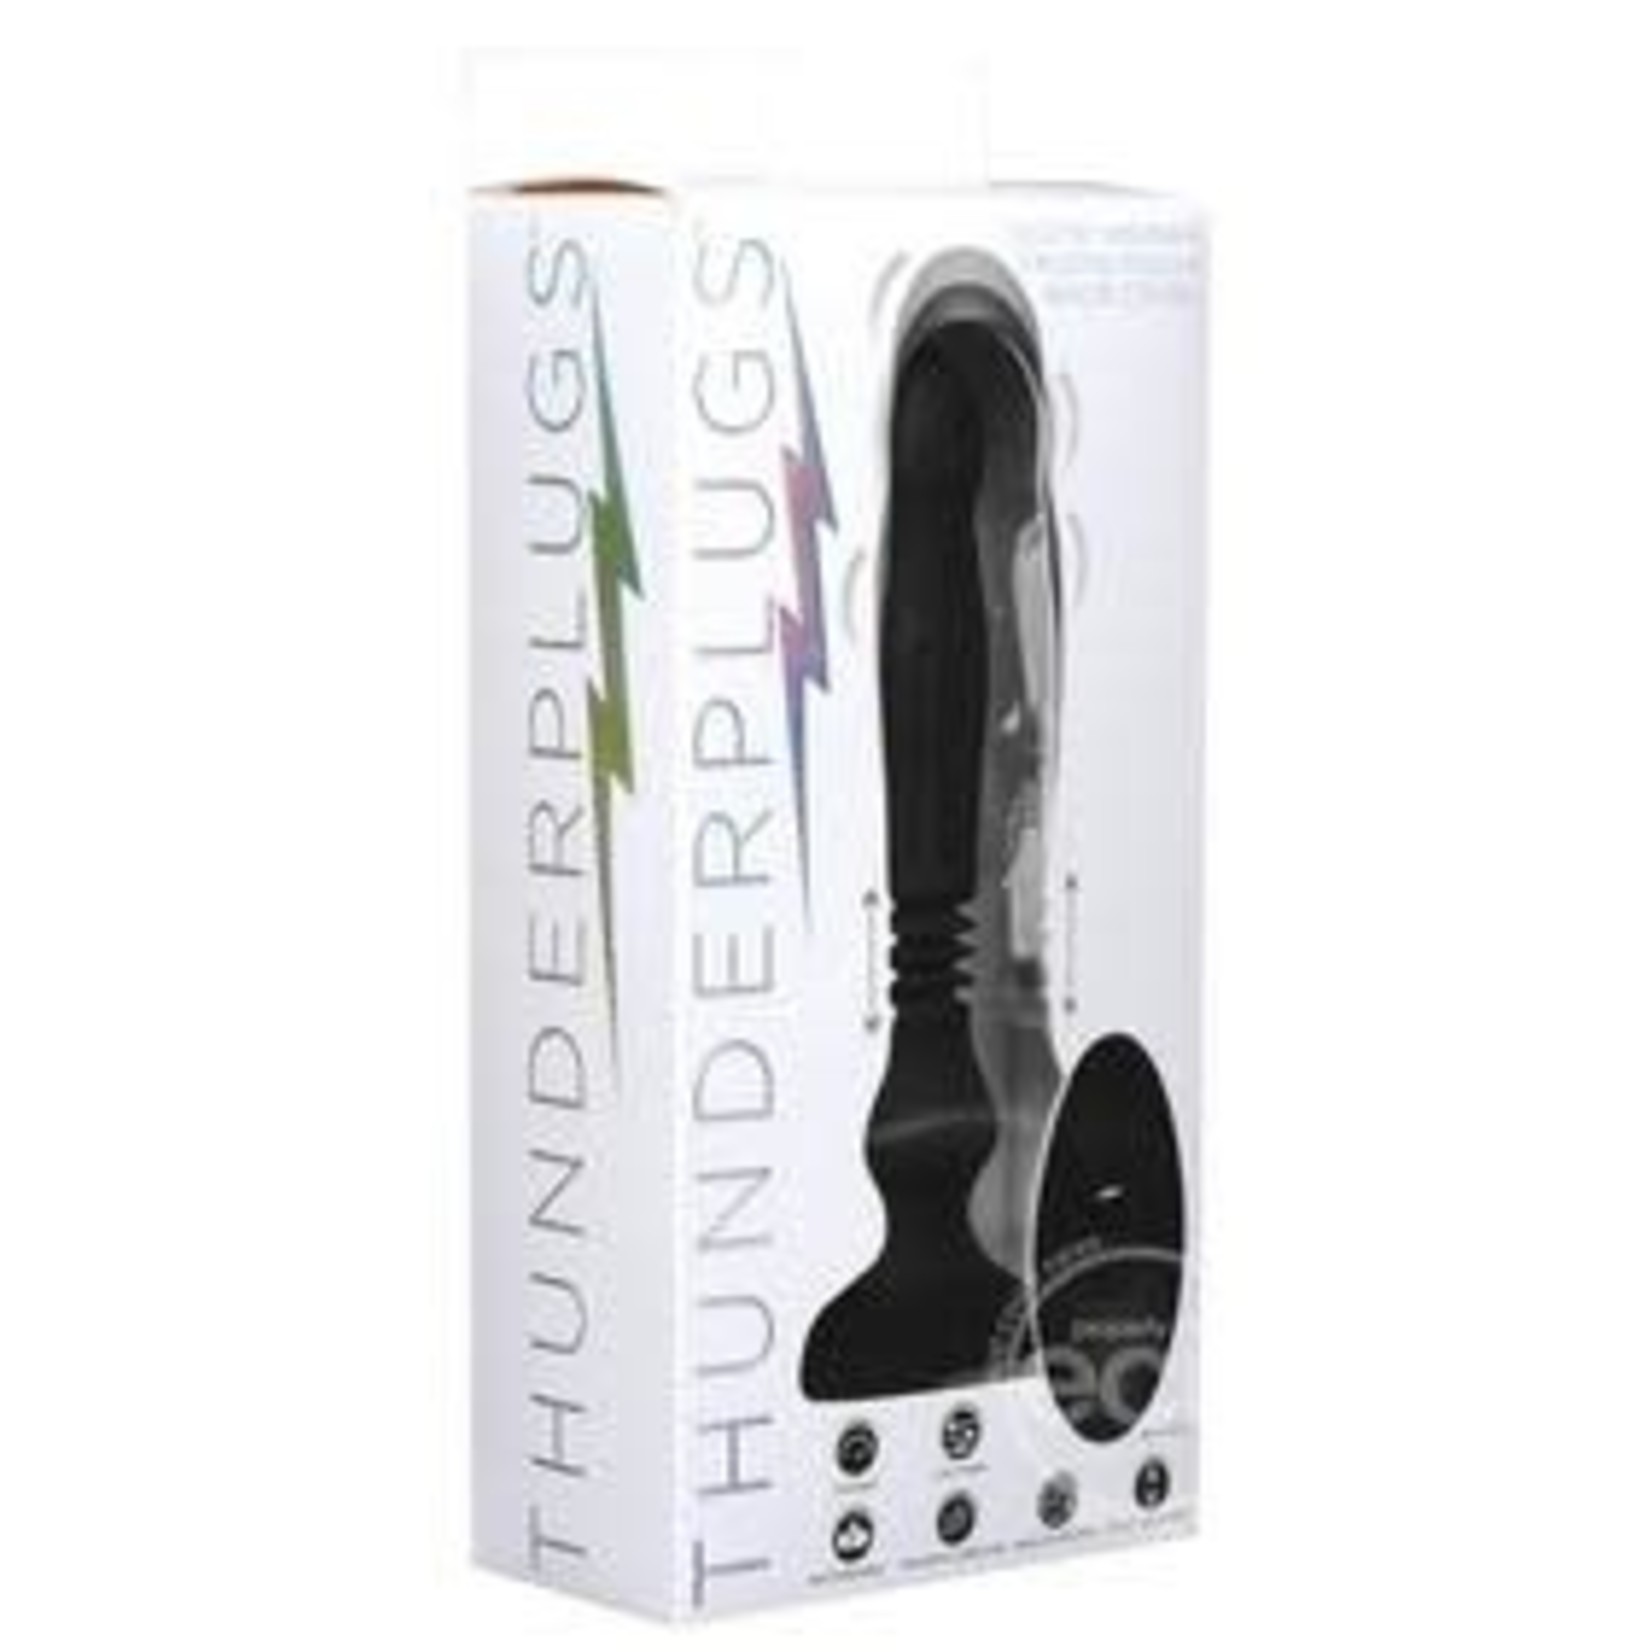 Thunder Plugs Silicone Swelling & Thrusting Plug with Remote Control - Black